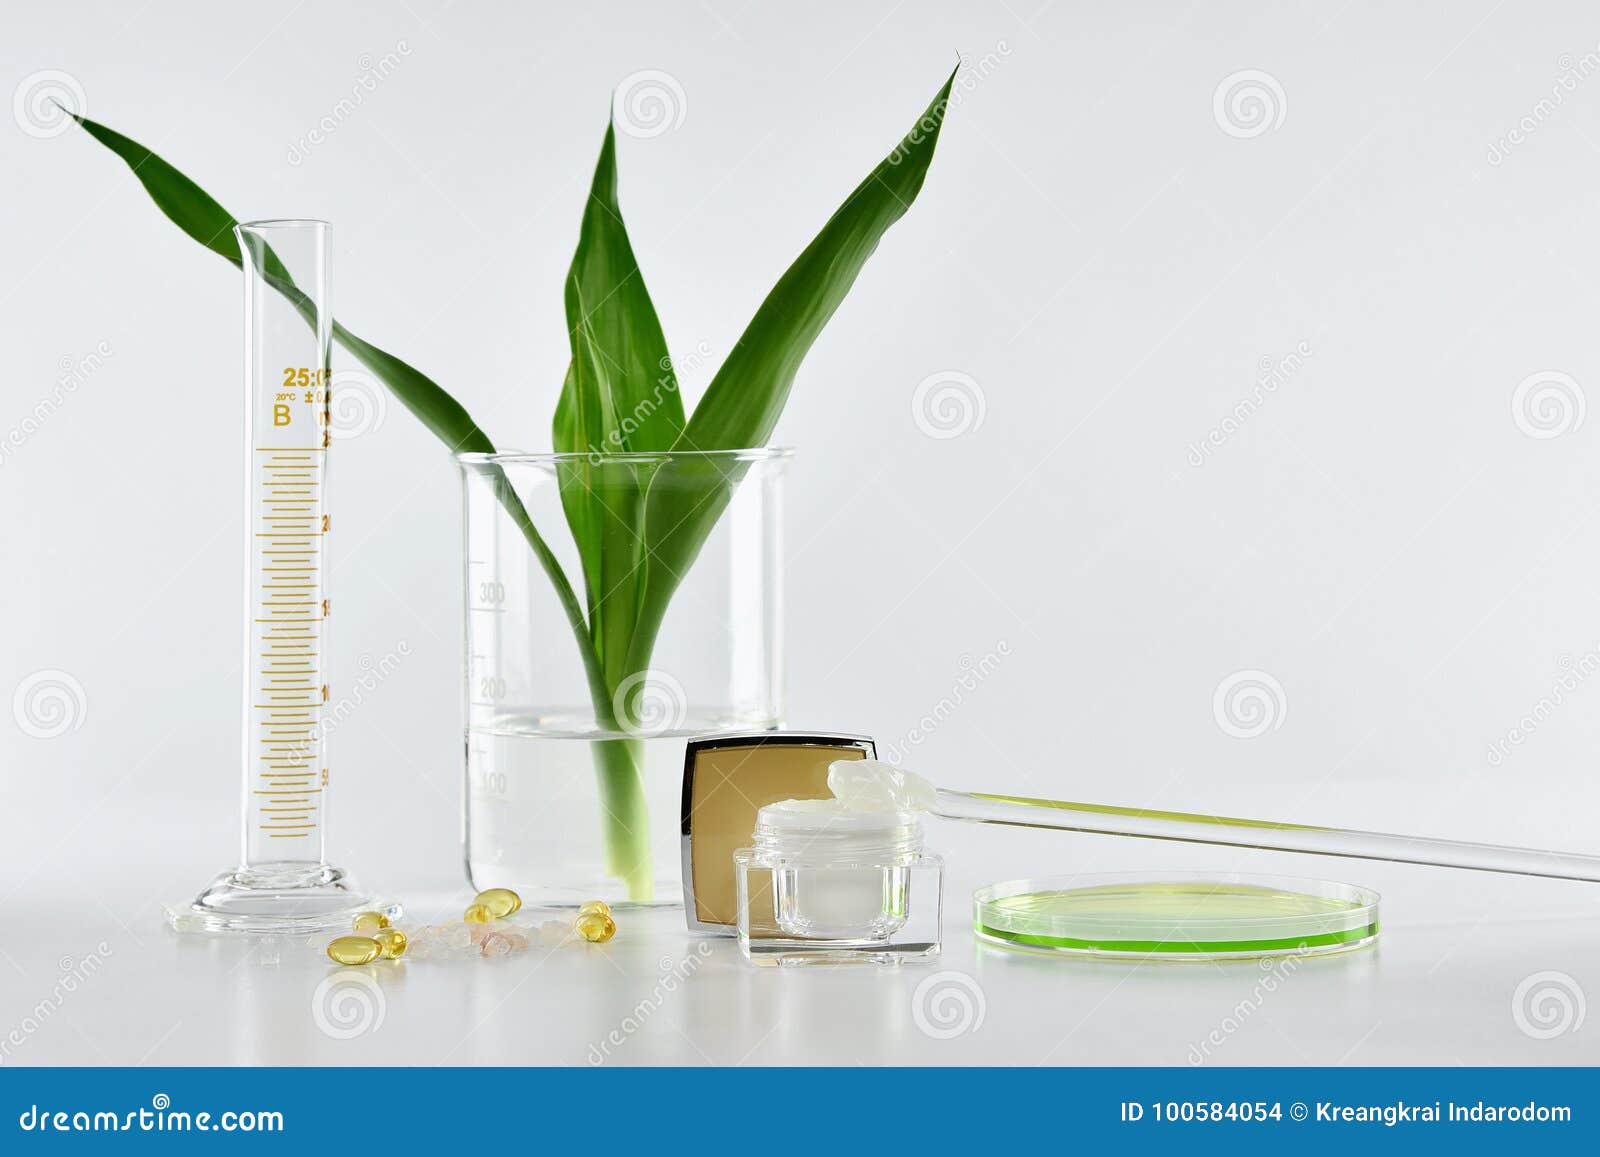 natural skincare, organic plant extract pharmaceutical cosmetics, equipment and science experiments